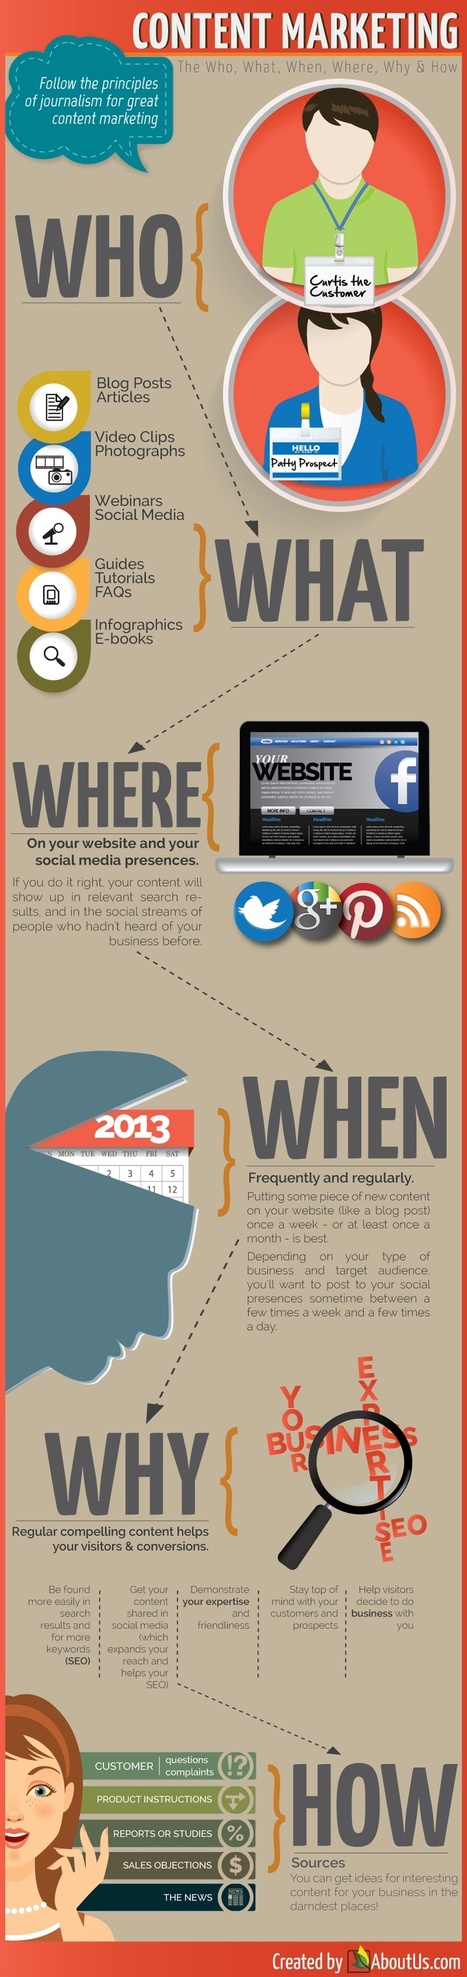 Content Marketing Is The New SEO [Infographic] | Must Market | Scoop.it